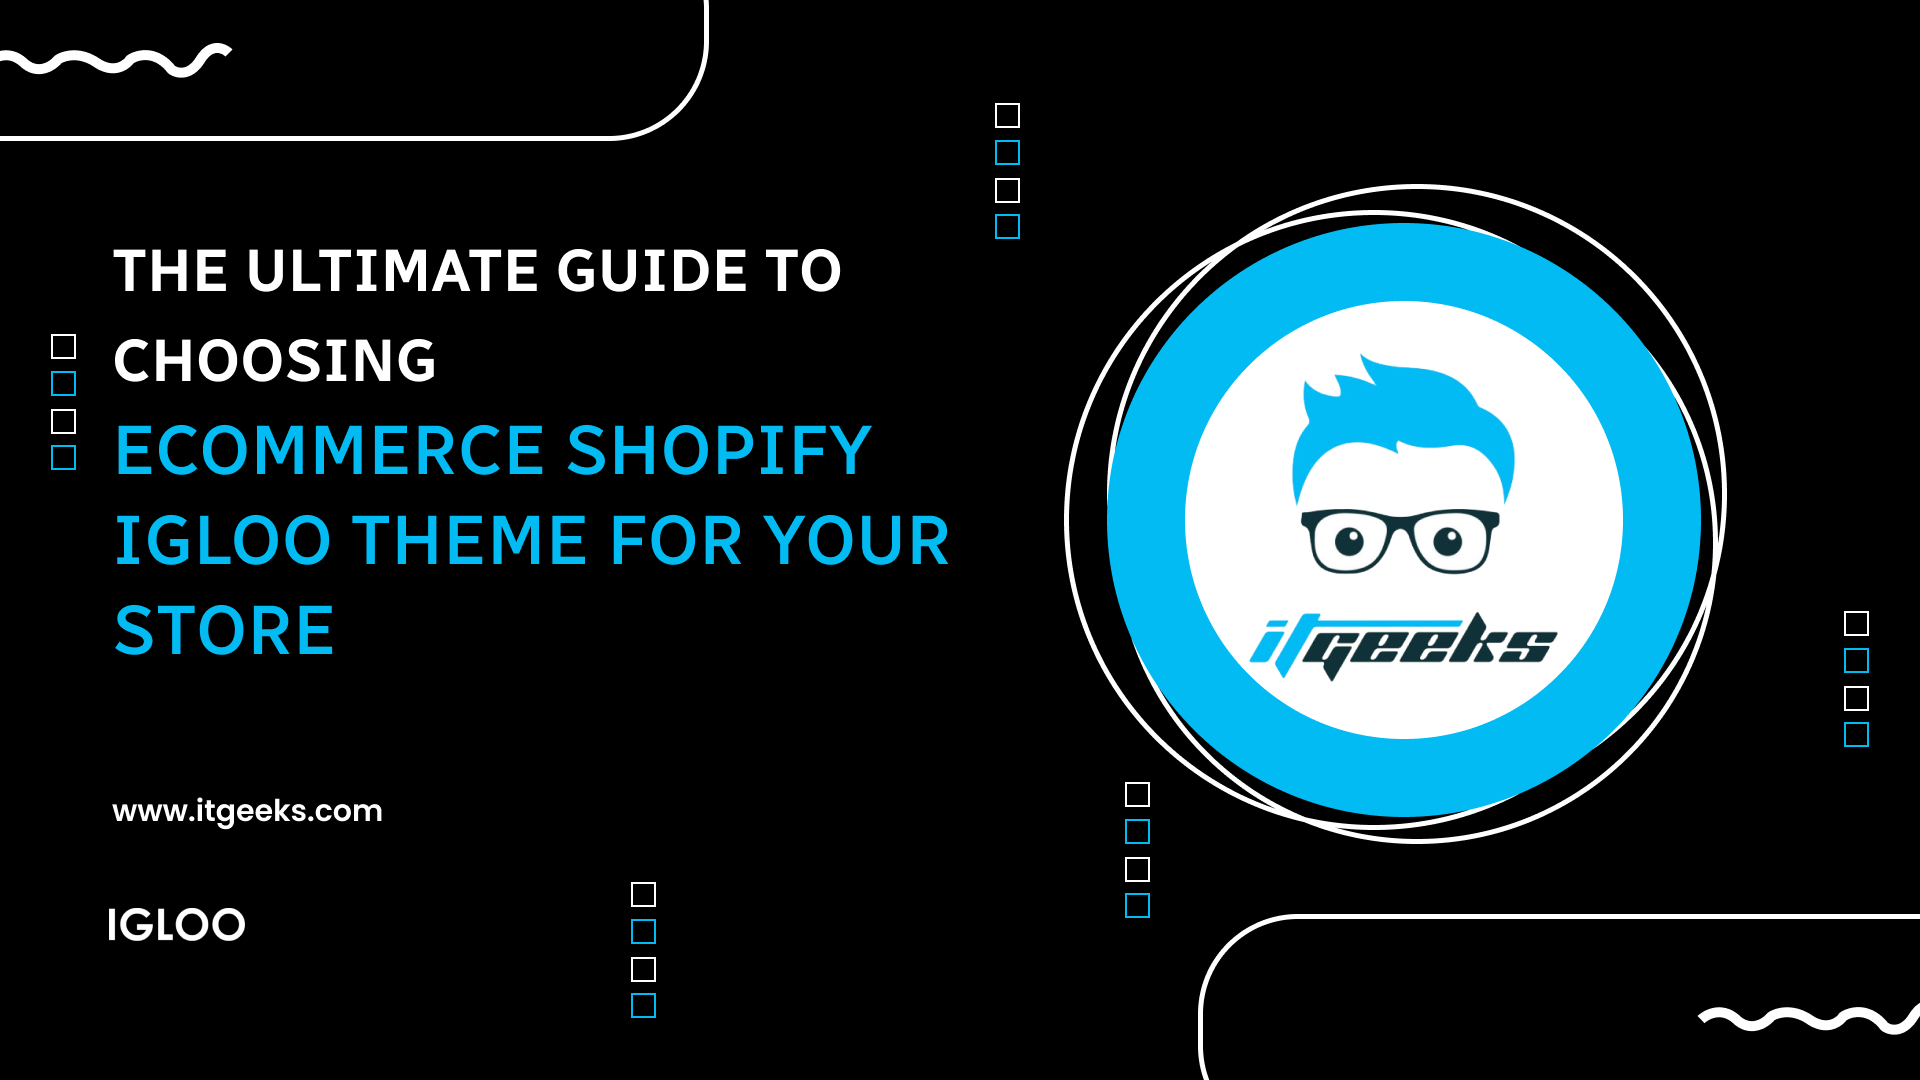 The Ultimate Guide to Choosing Ecommerce Shopify Igloo Theme for Your Store